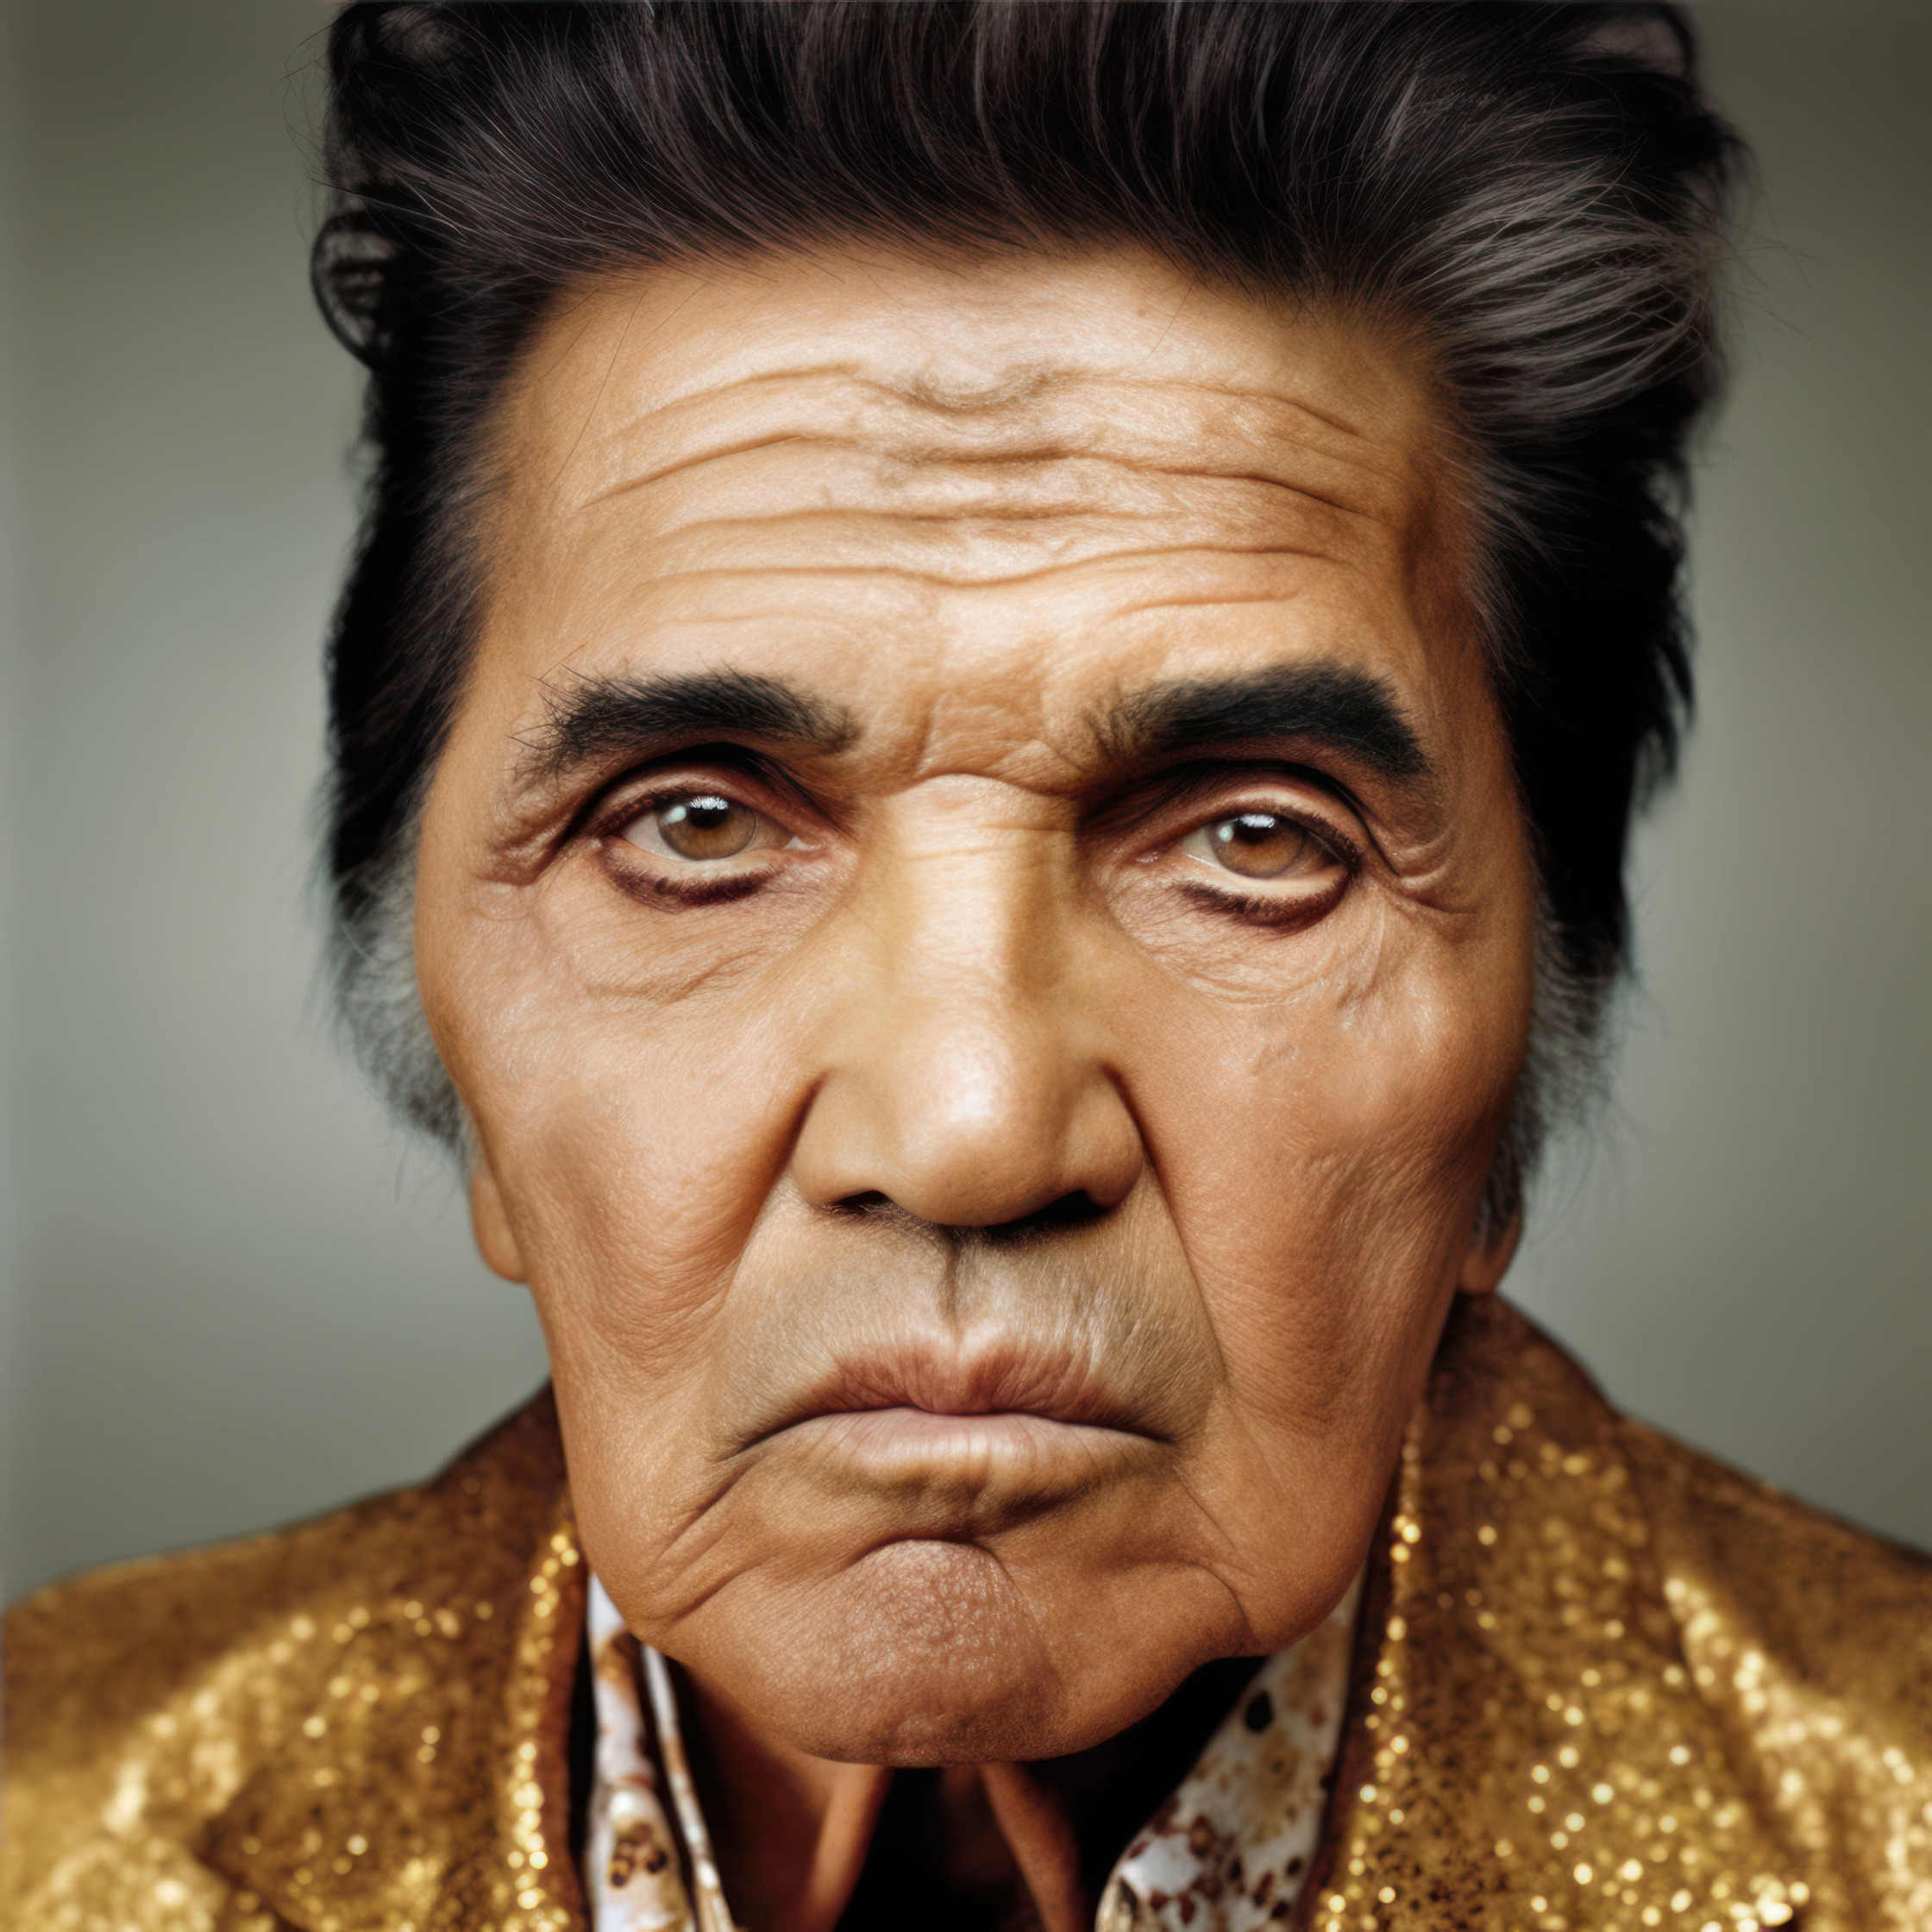 elvis presley's face at age 70 in a gold jacket